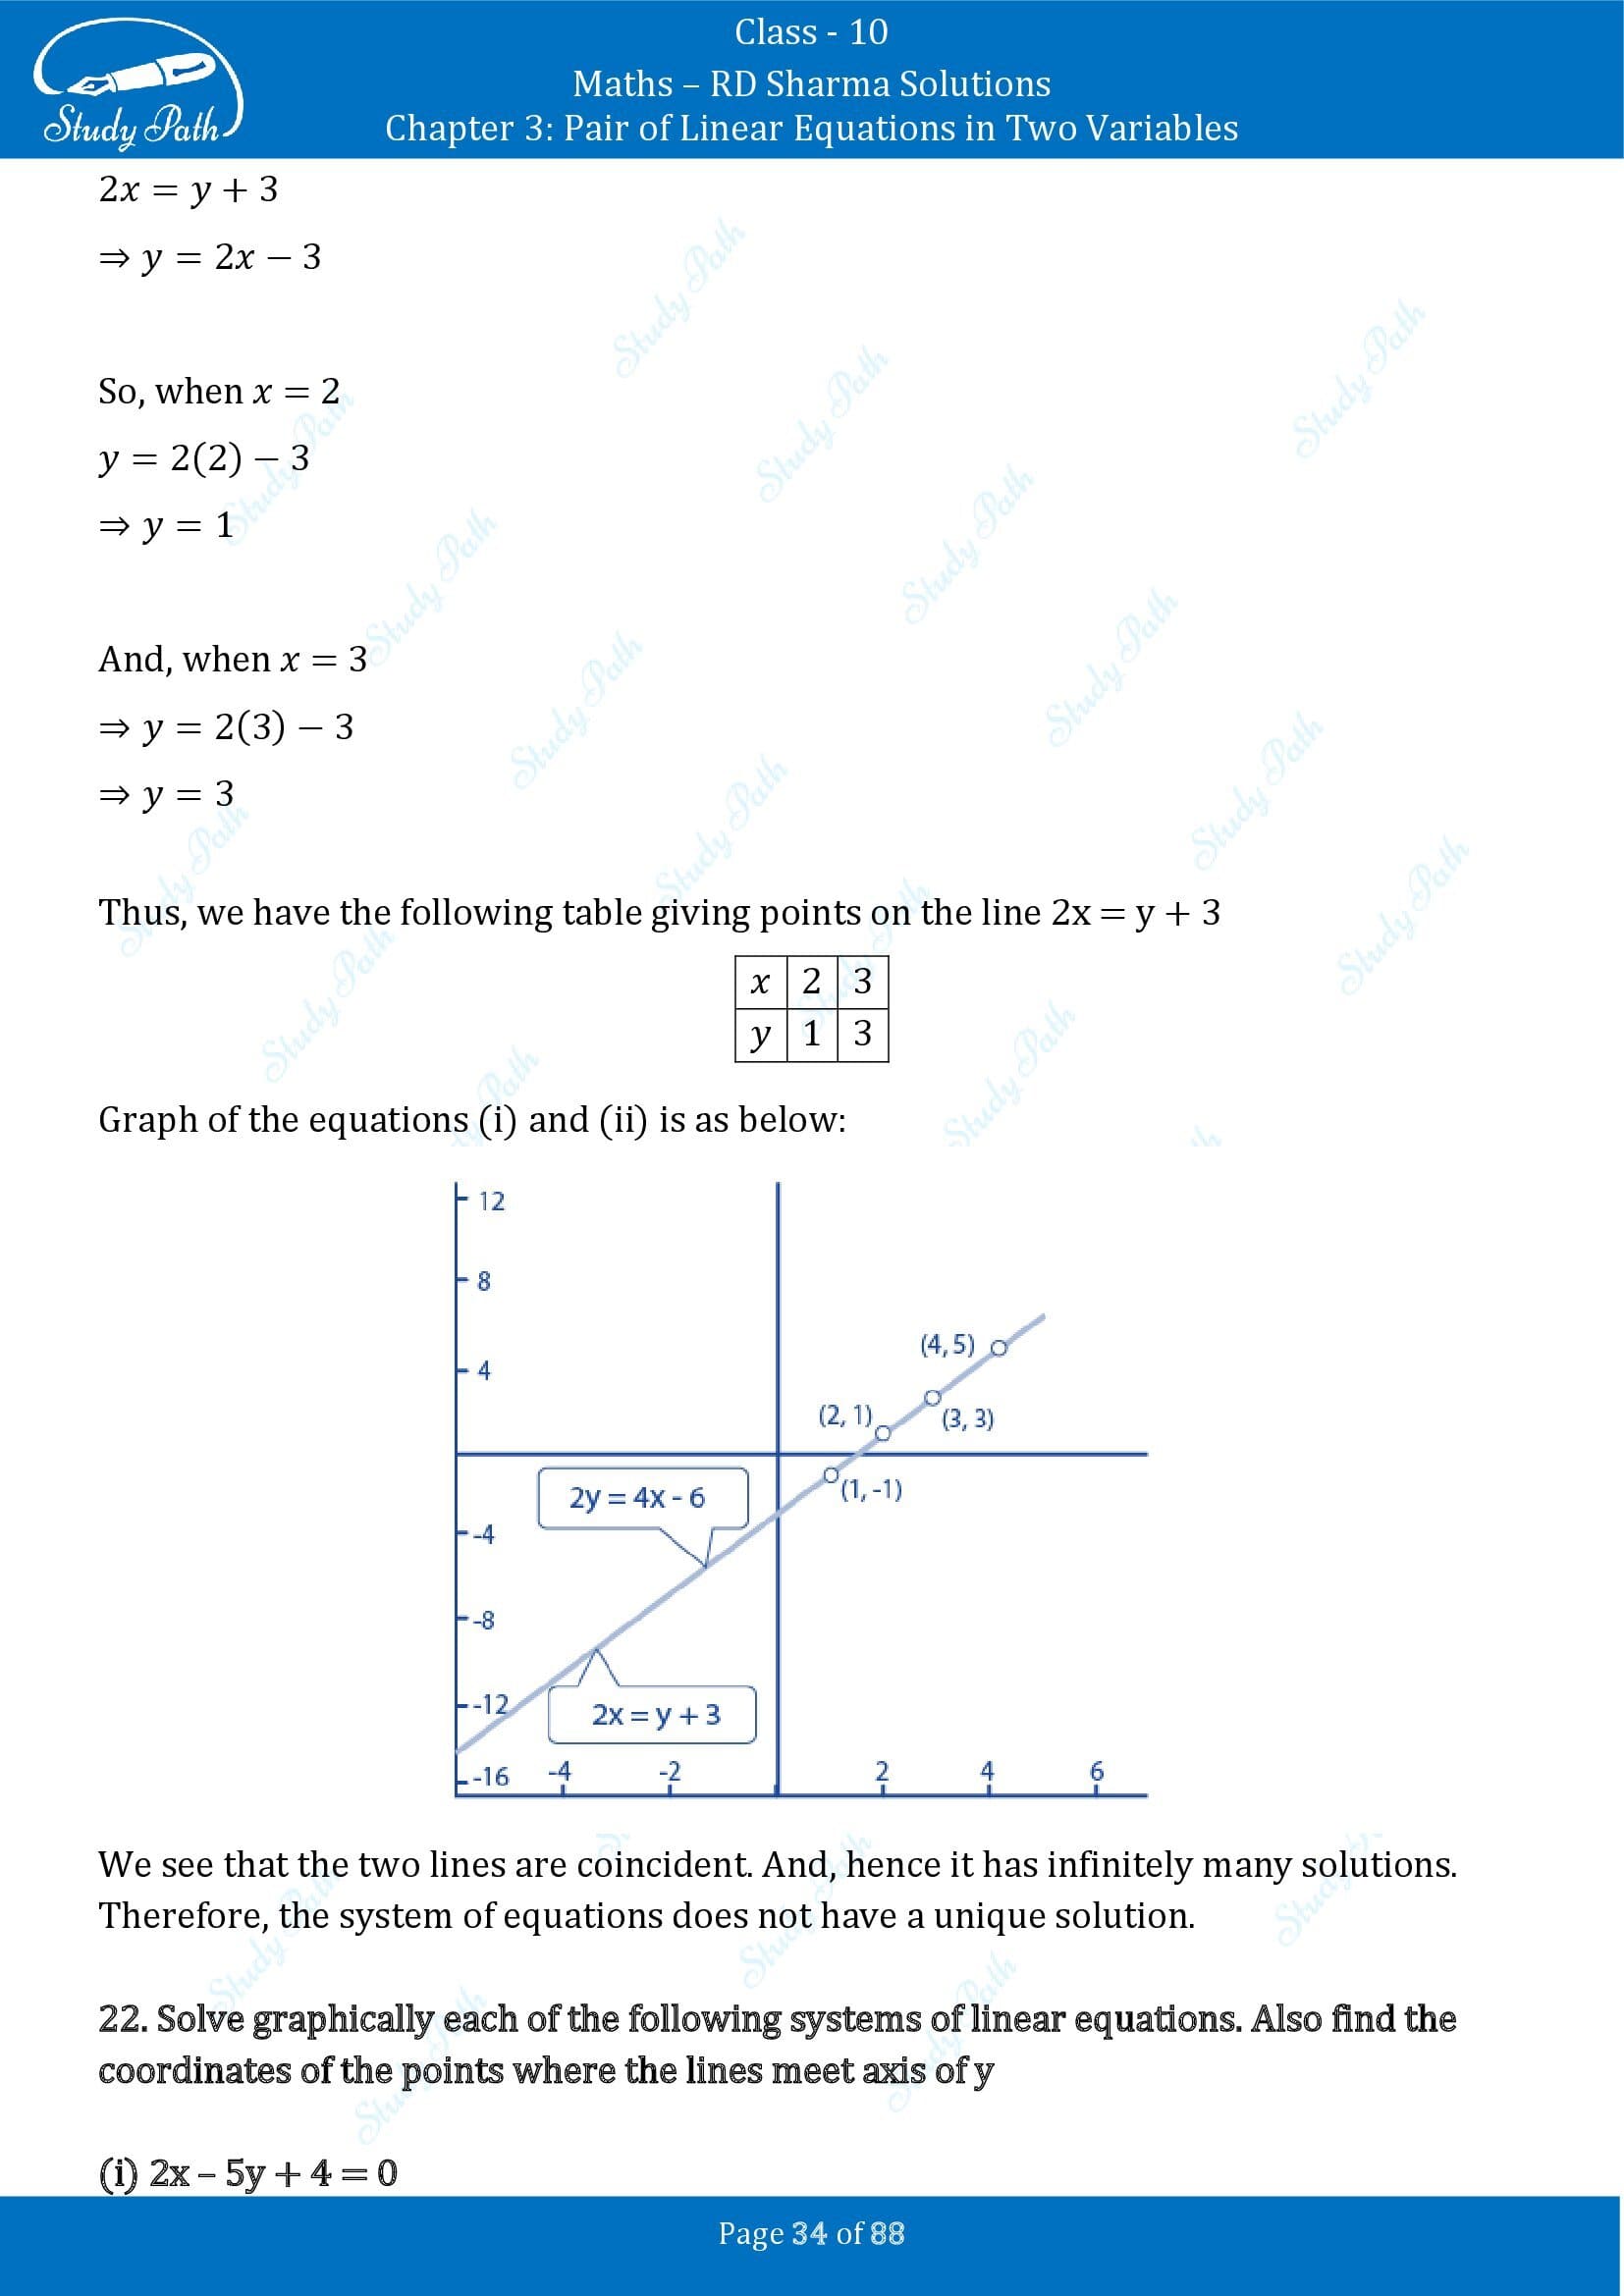 RD Sharma Solutions Class 10 Chapter 3 Pair of Linear Equations in Two Variables Exercise 3.2 00034